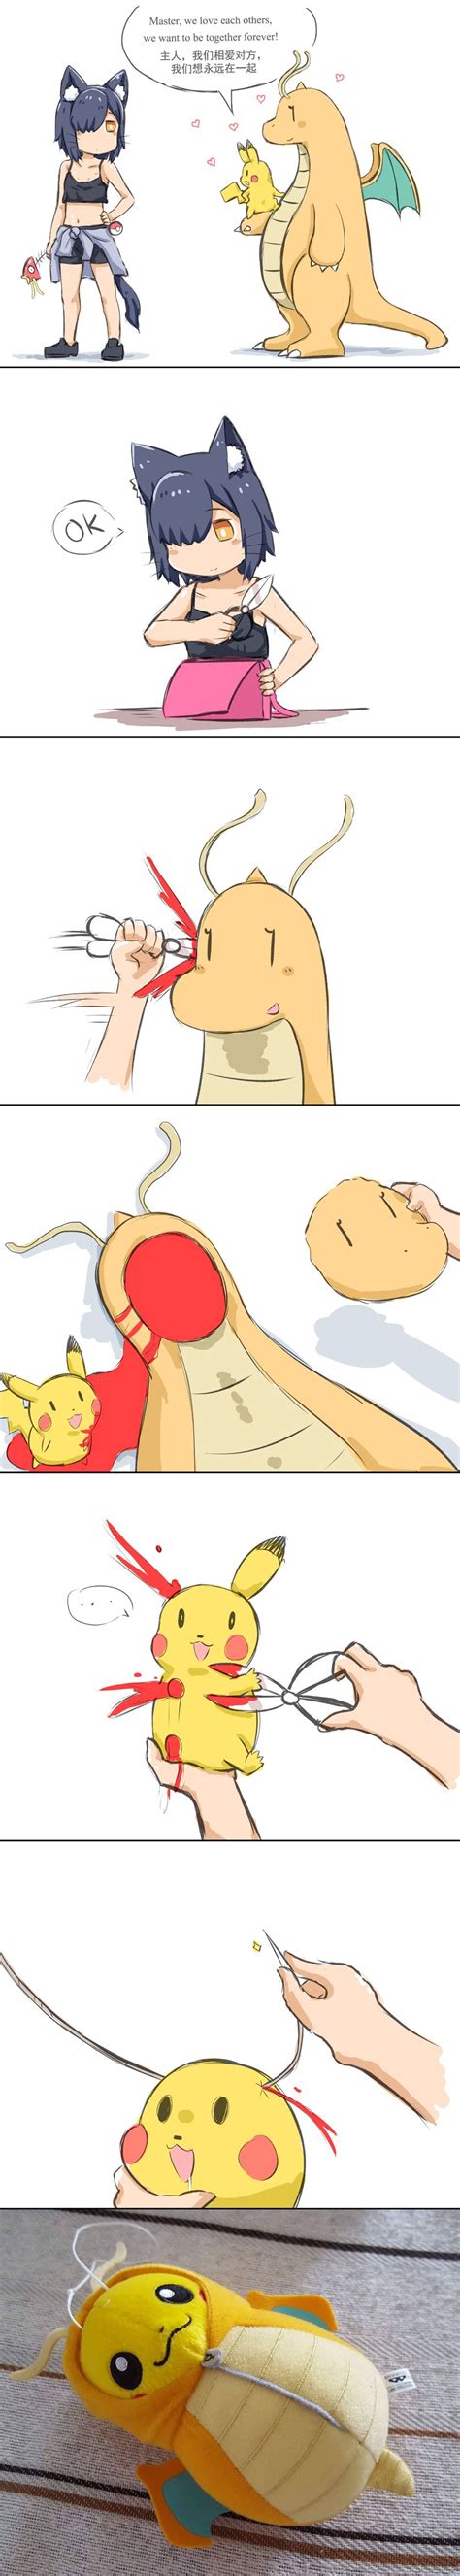 pokemon pictures and jokes fandoms funny pictures and best jokes comics images video